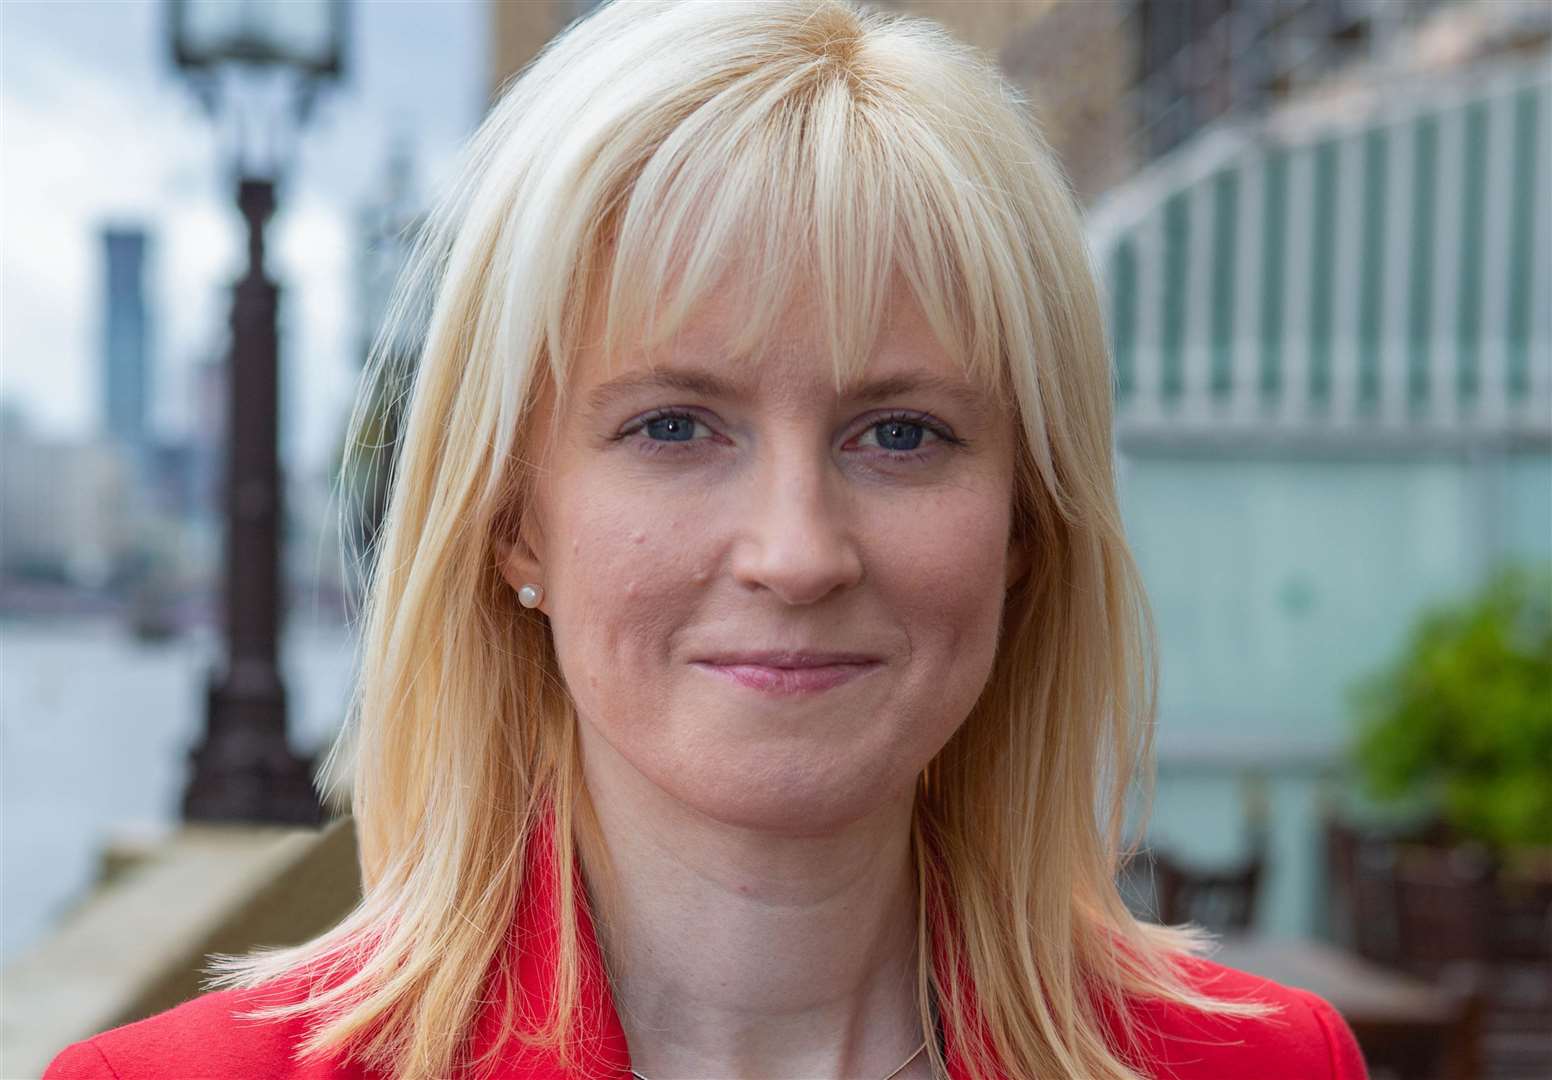 Labour MP Rosie Duffield has apologised for breaching lockdown restrictions